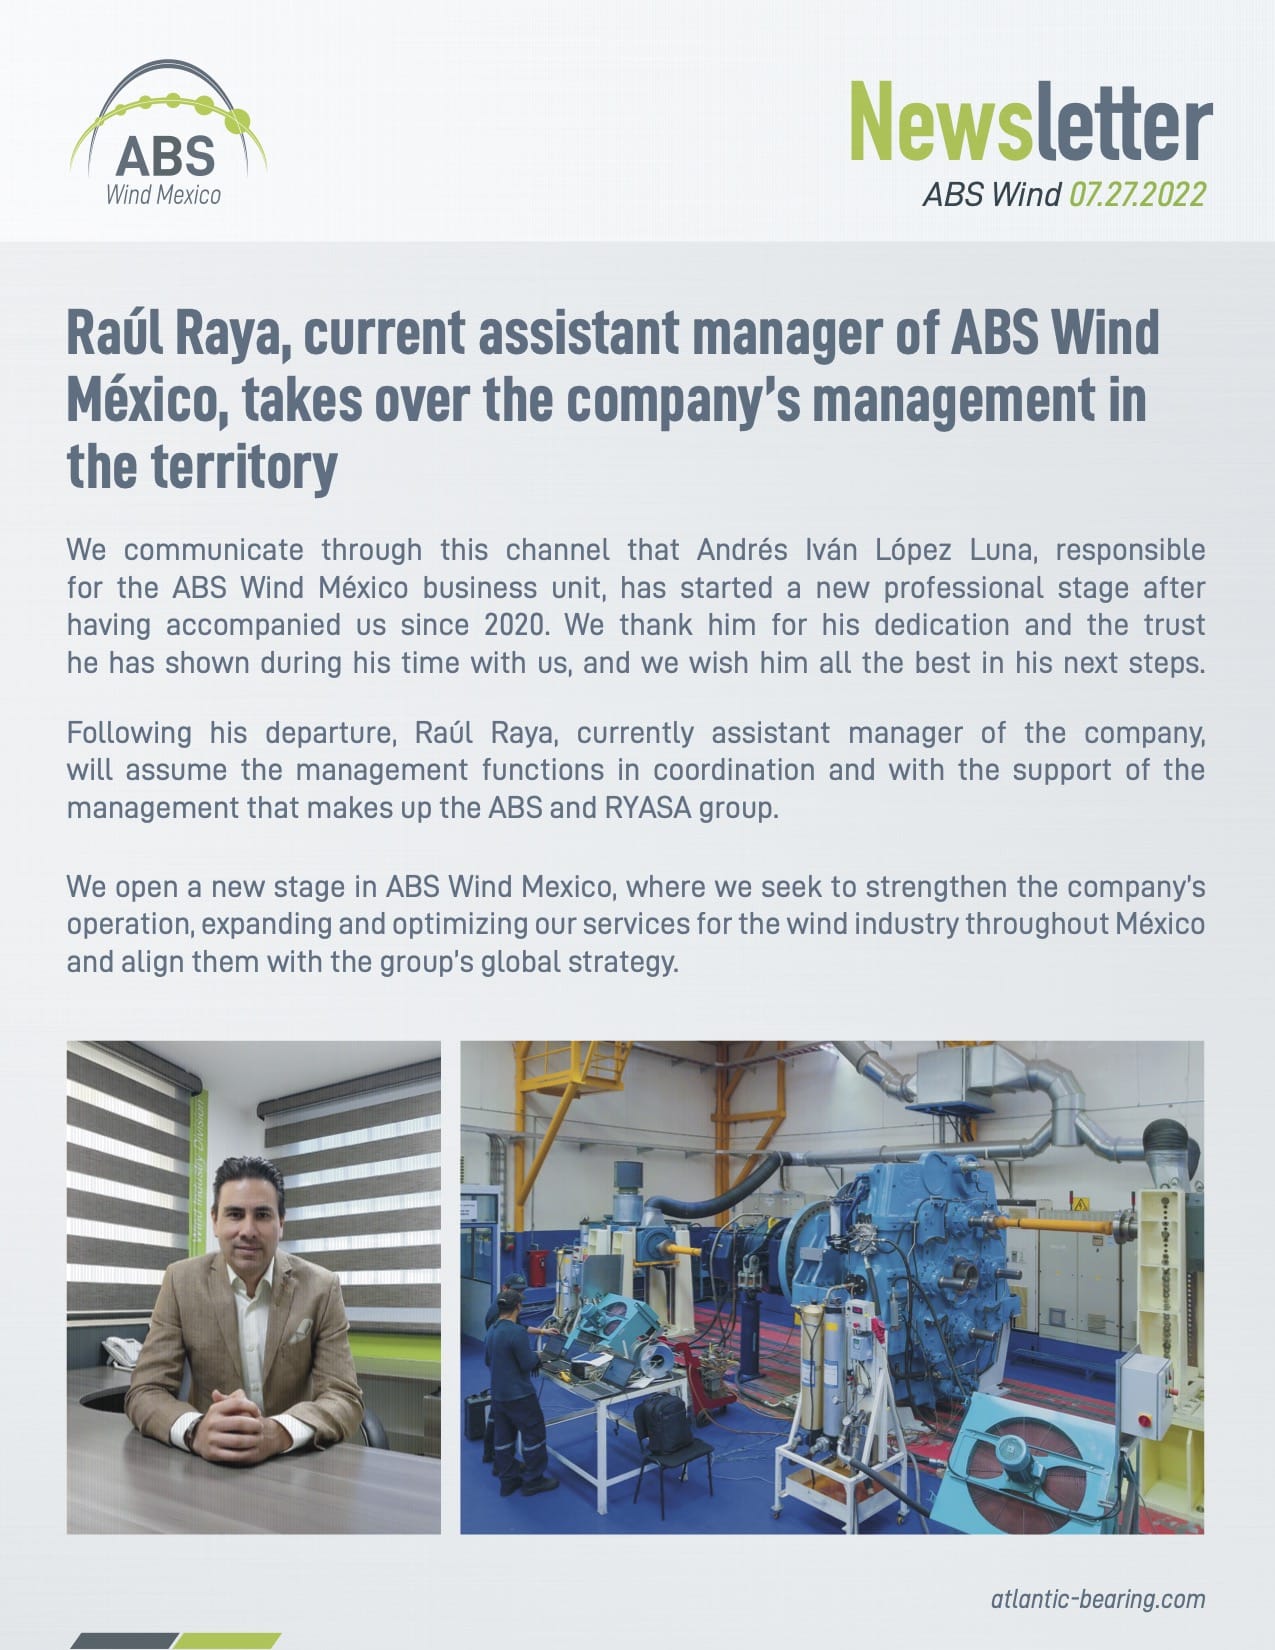 Raúl Raya, current assistant manager of ABS Wind México, takes over the company’s management in the territory